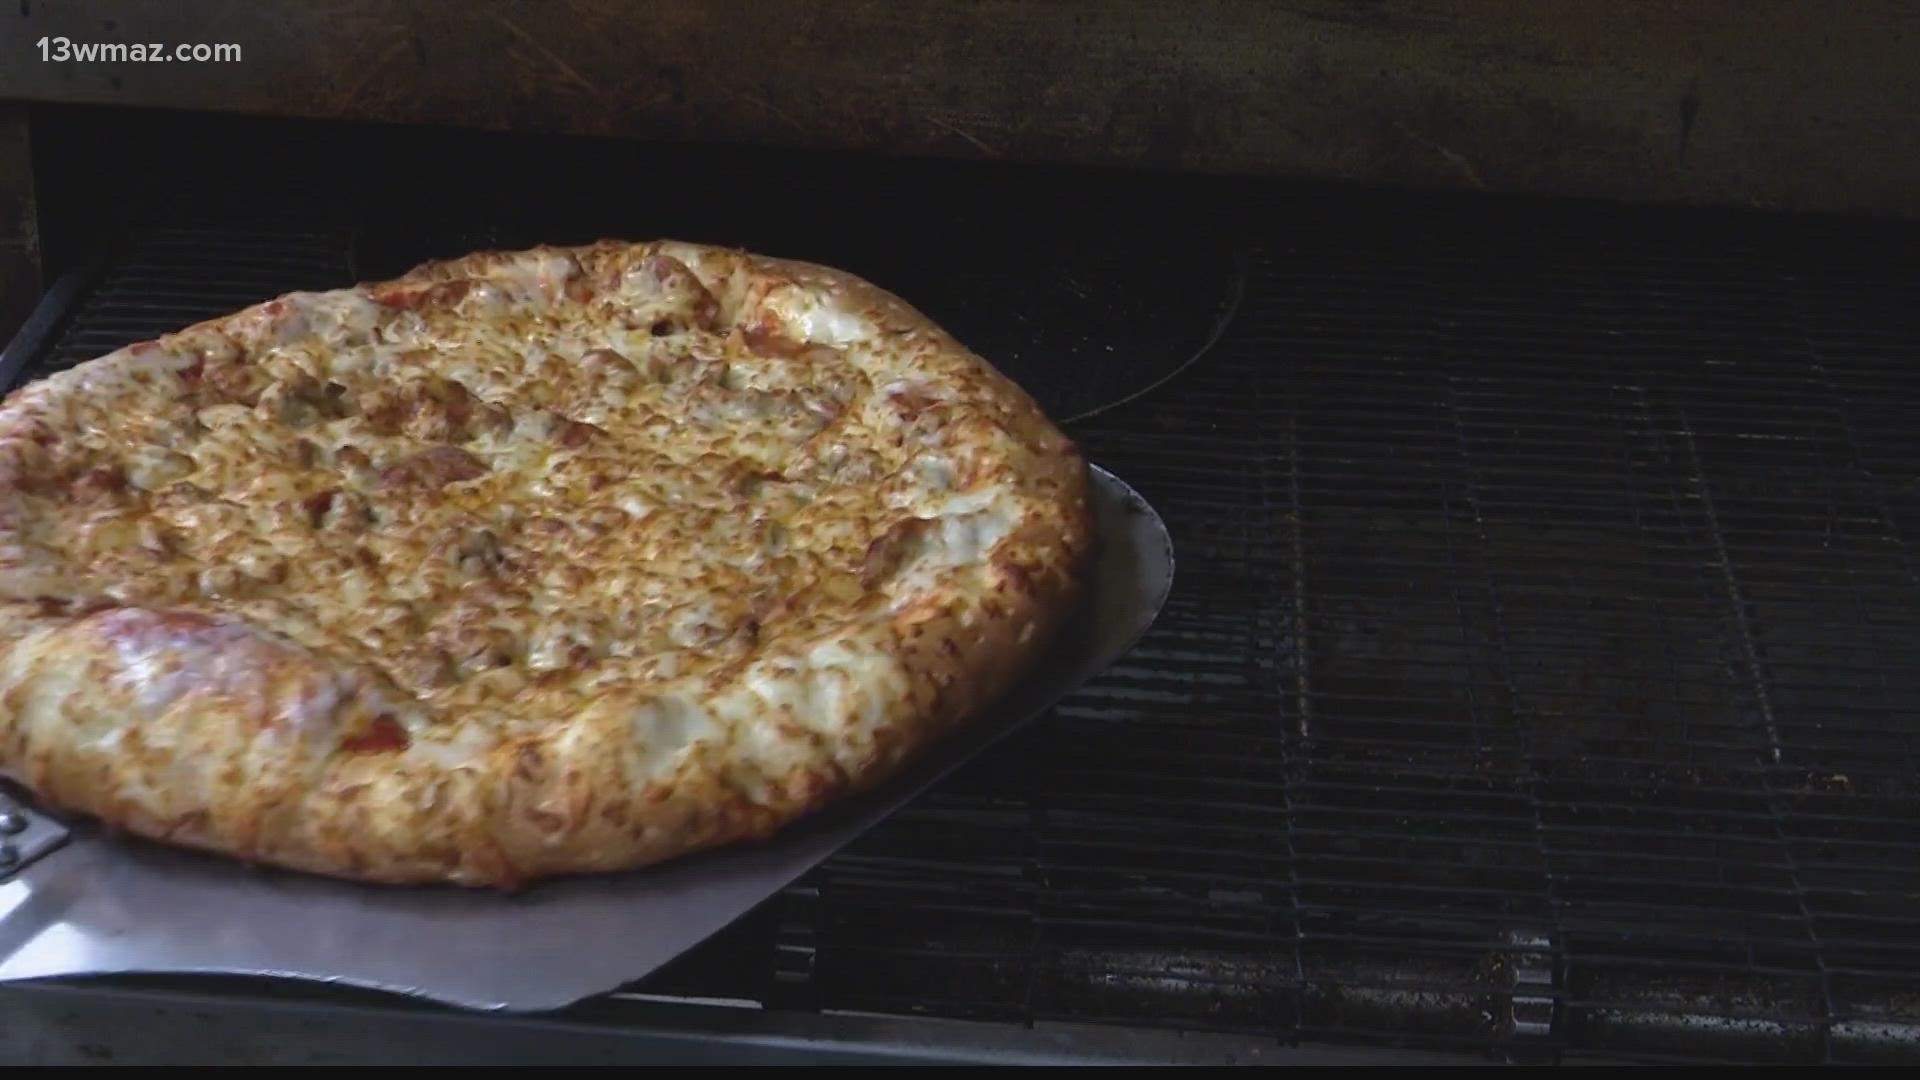 Stoner's Pizza Joint in Warner Robins has been preparing since Wednesday. They expect to triple their normal Sunday sales, and sell nearly 400 pizzas.